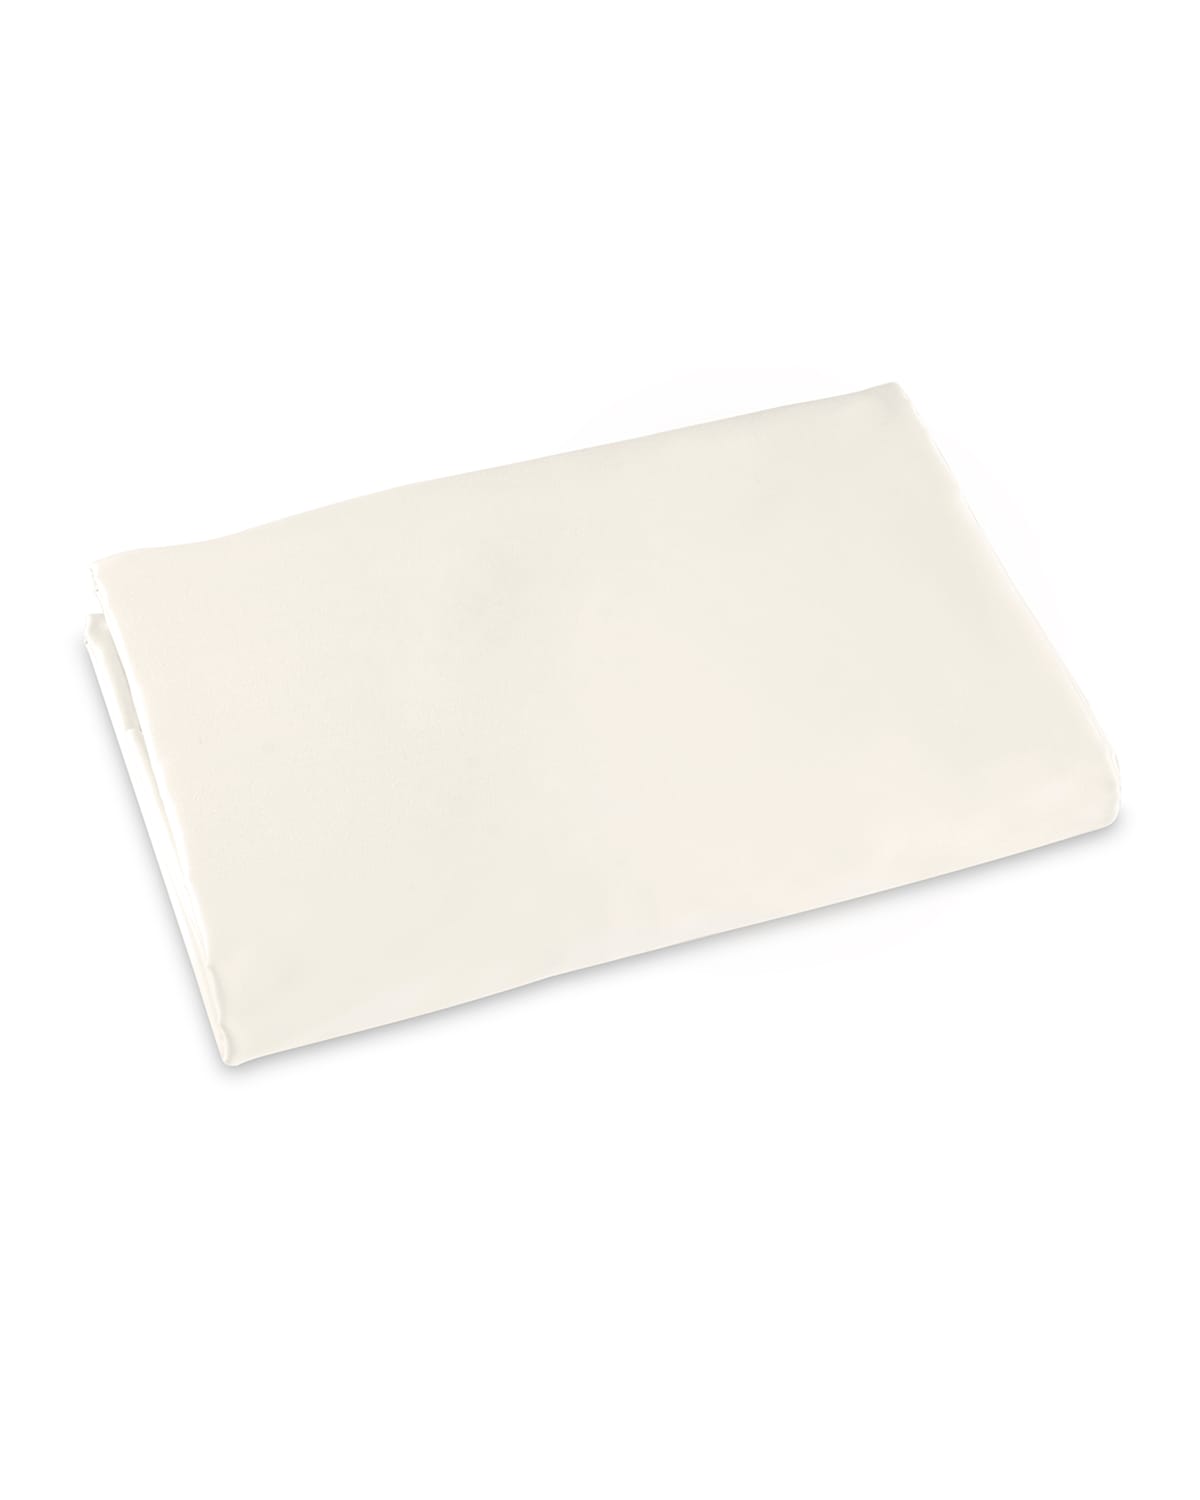 Signoria Firenze Tuscan Dreams California King Fitted Sheet In Ivory